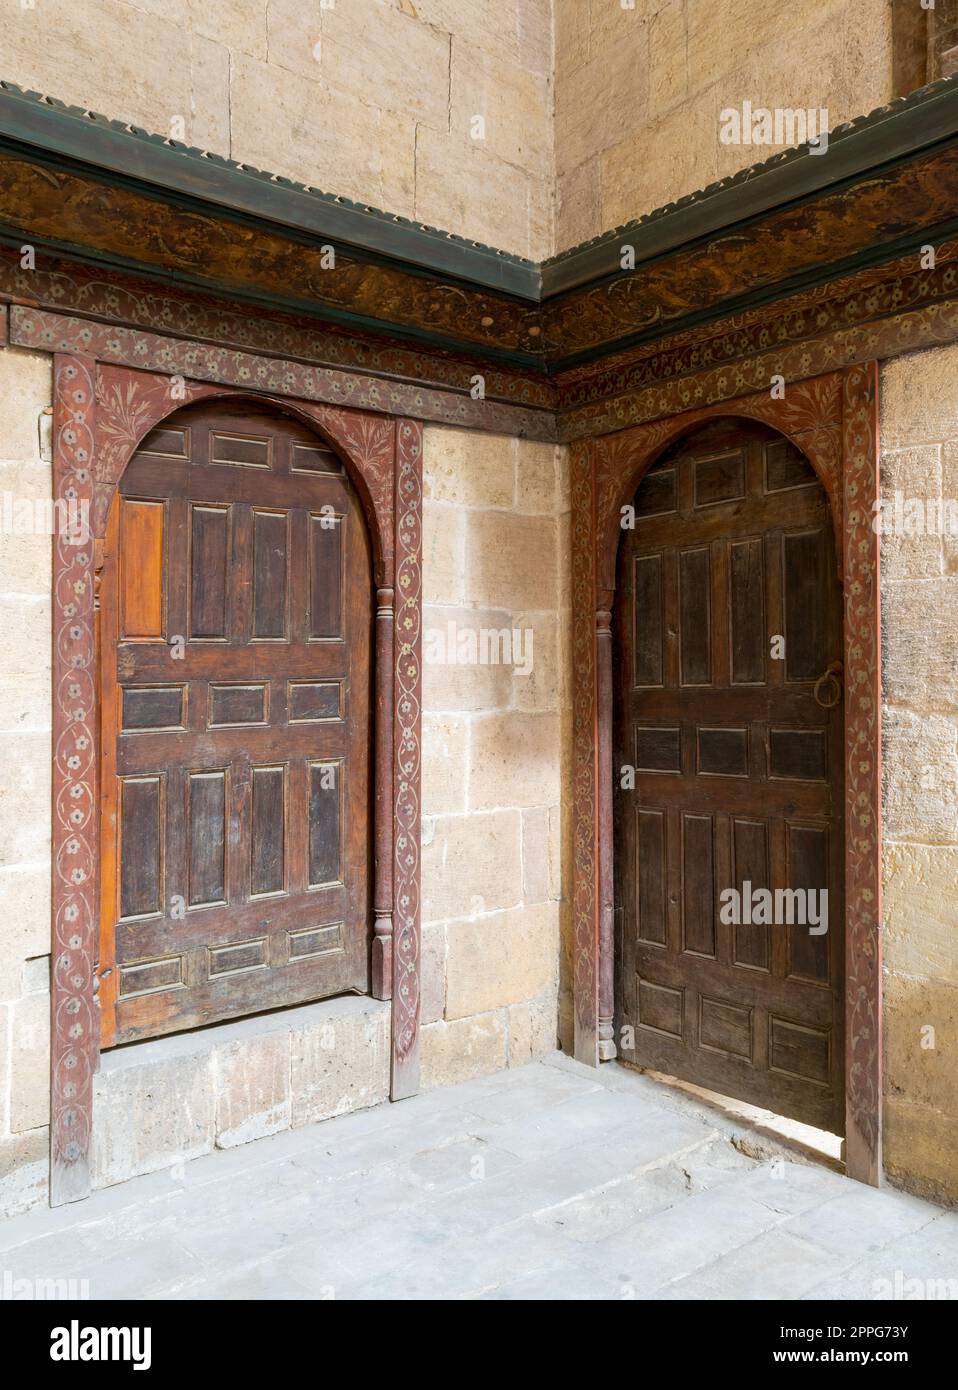 Two wooden aged ornate vaulted perpendicular doors on stone bricks walls Stock Photo